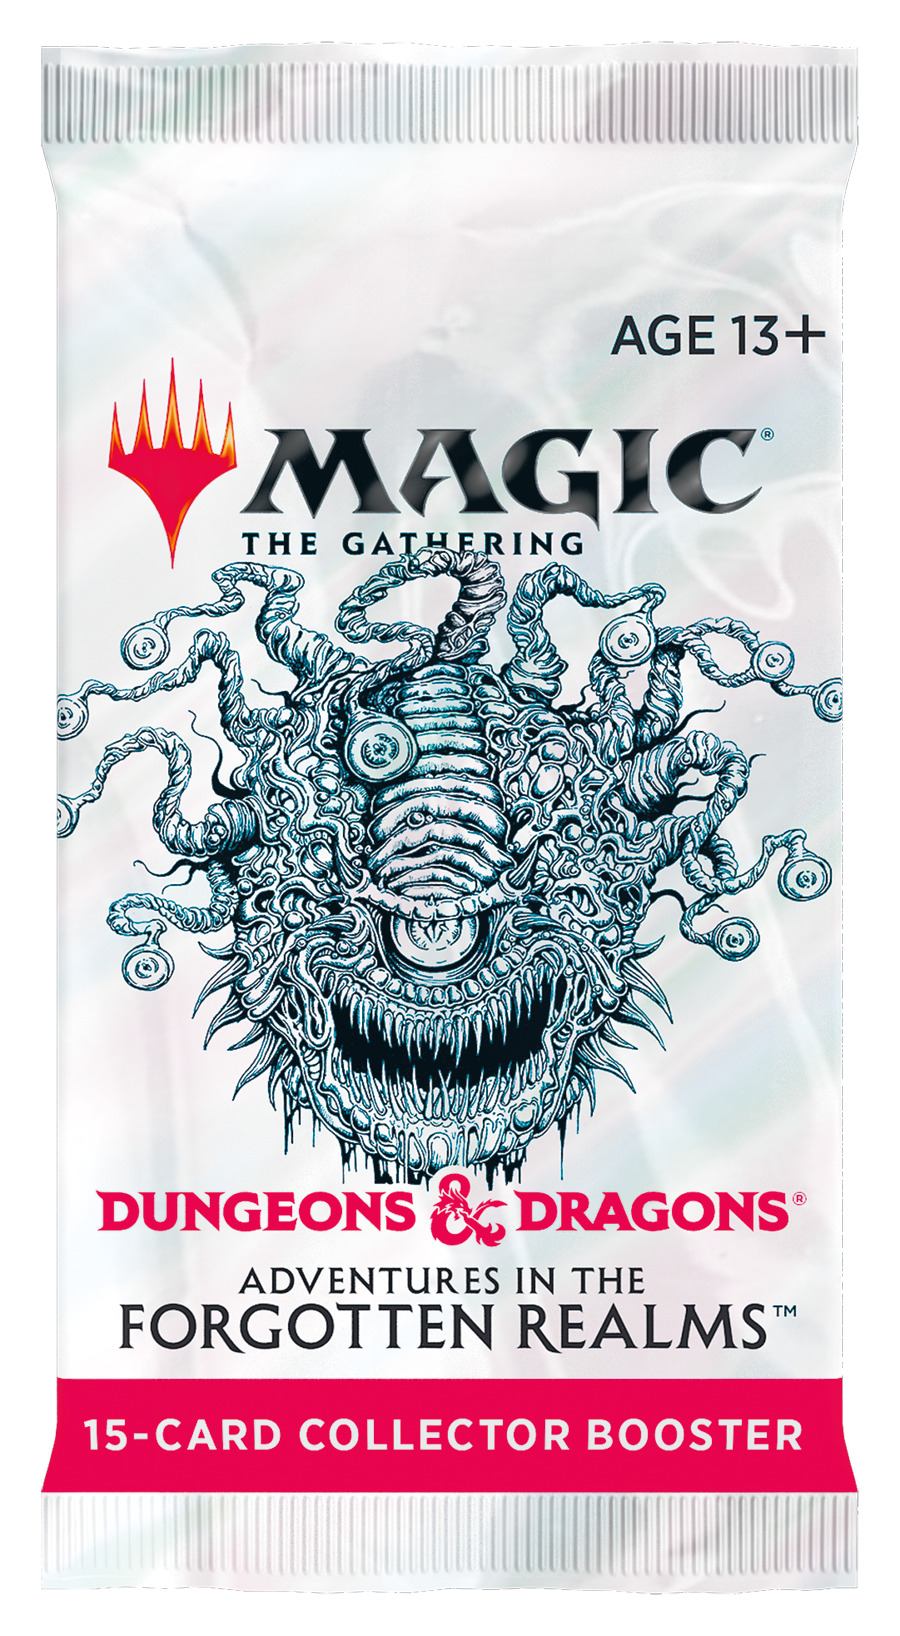 Karetní hra Magic: The Gathering Dungeons and Dragons: Adventures in the Forgotten Realms - Collector Booster (15 karet)